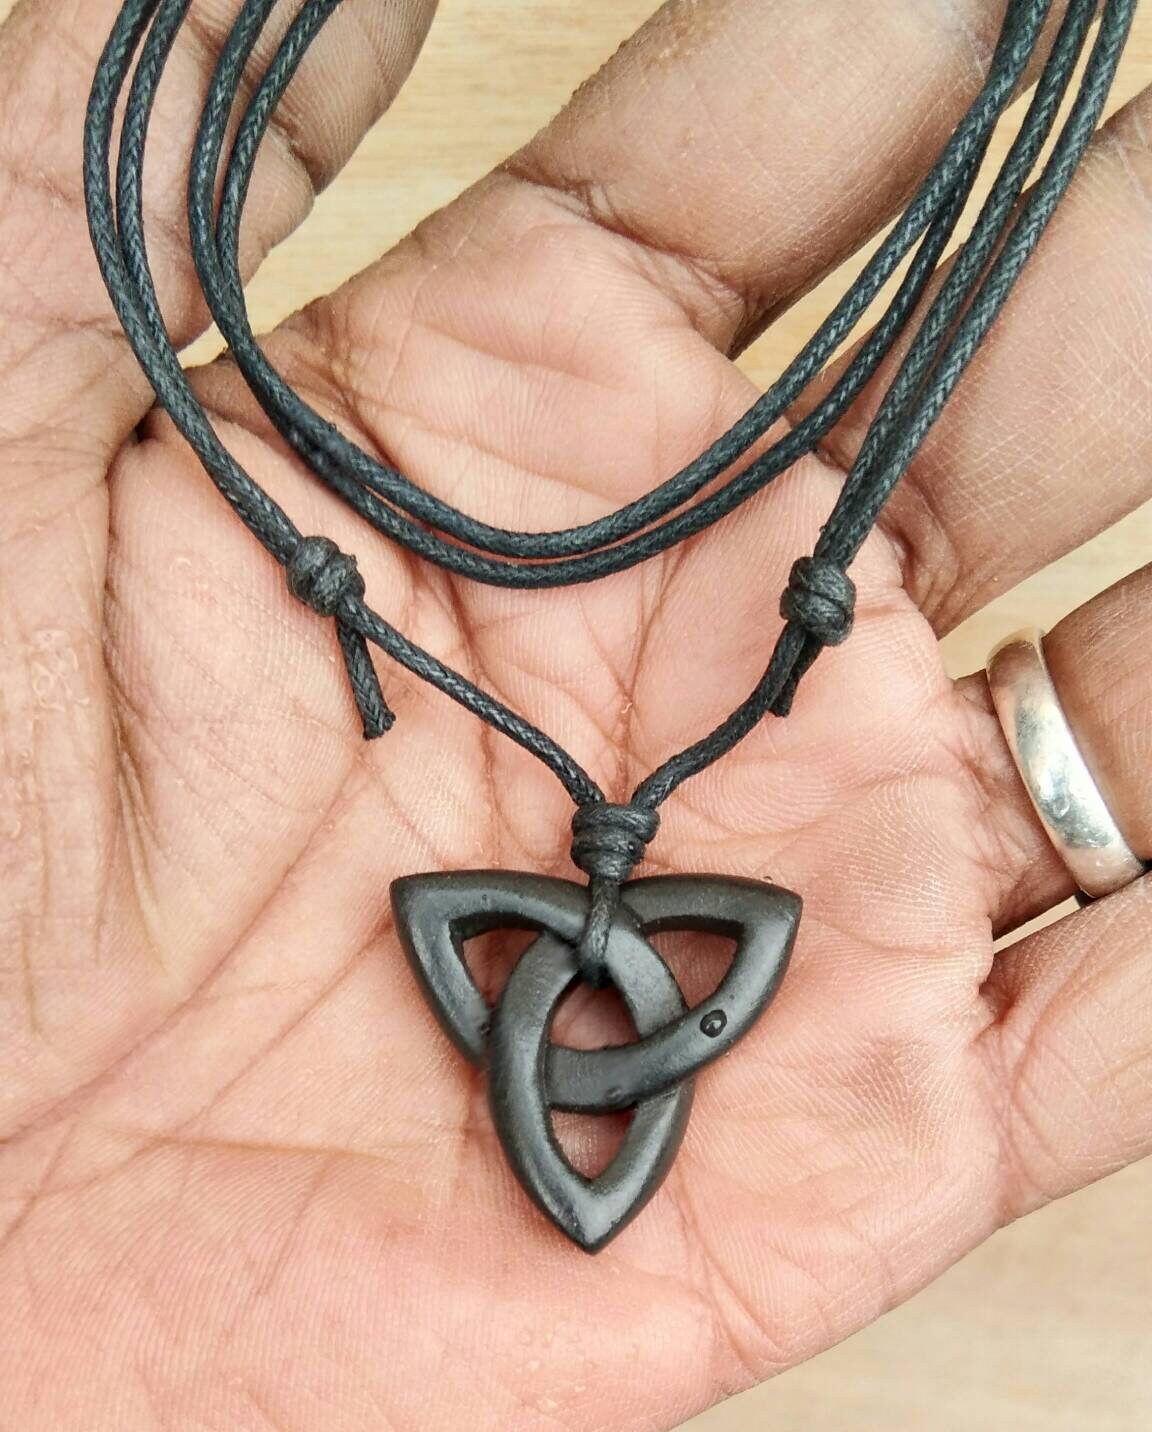 Celtic Knot Triquetra Pendant Charm Necklace Jewelry Eternity Trinity  Frienship Love Symbol Hand-carved From Natural Stone by Myself 